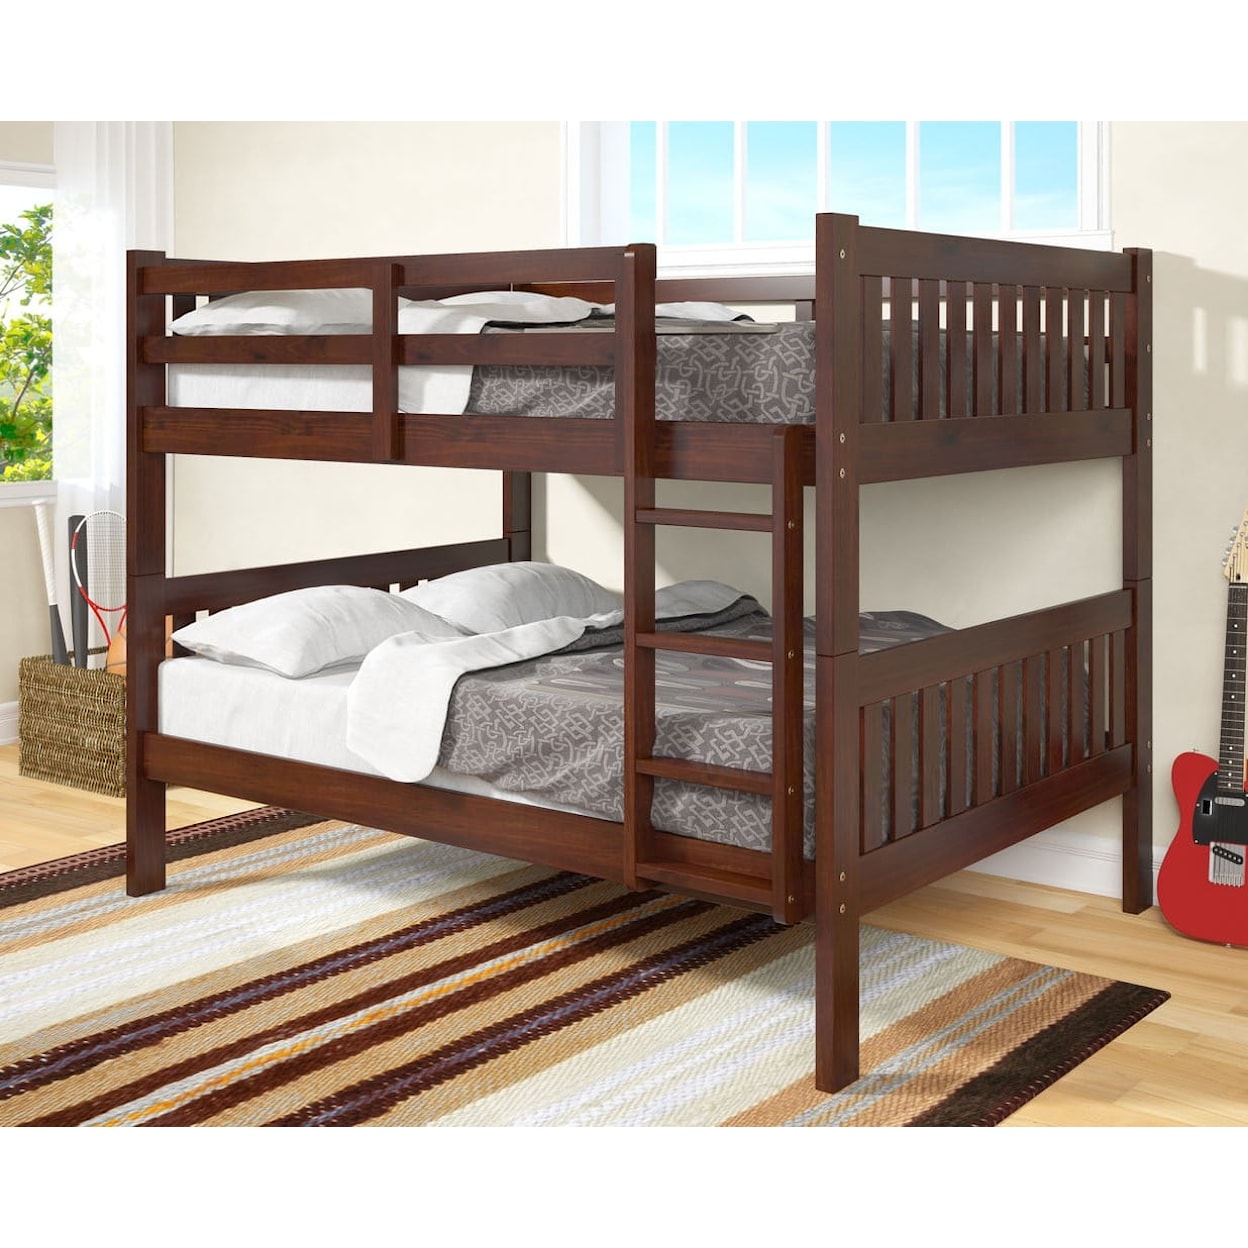 Donco Trading Co Bunkbeds MISSION CAPPUCINO FULL/FULL BUNK | BED